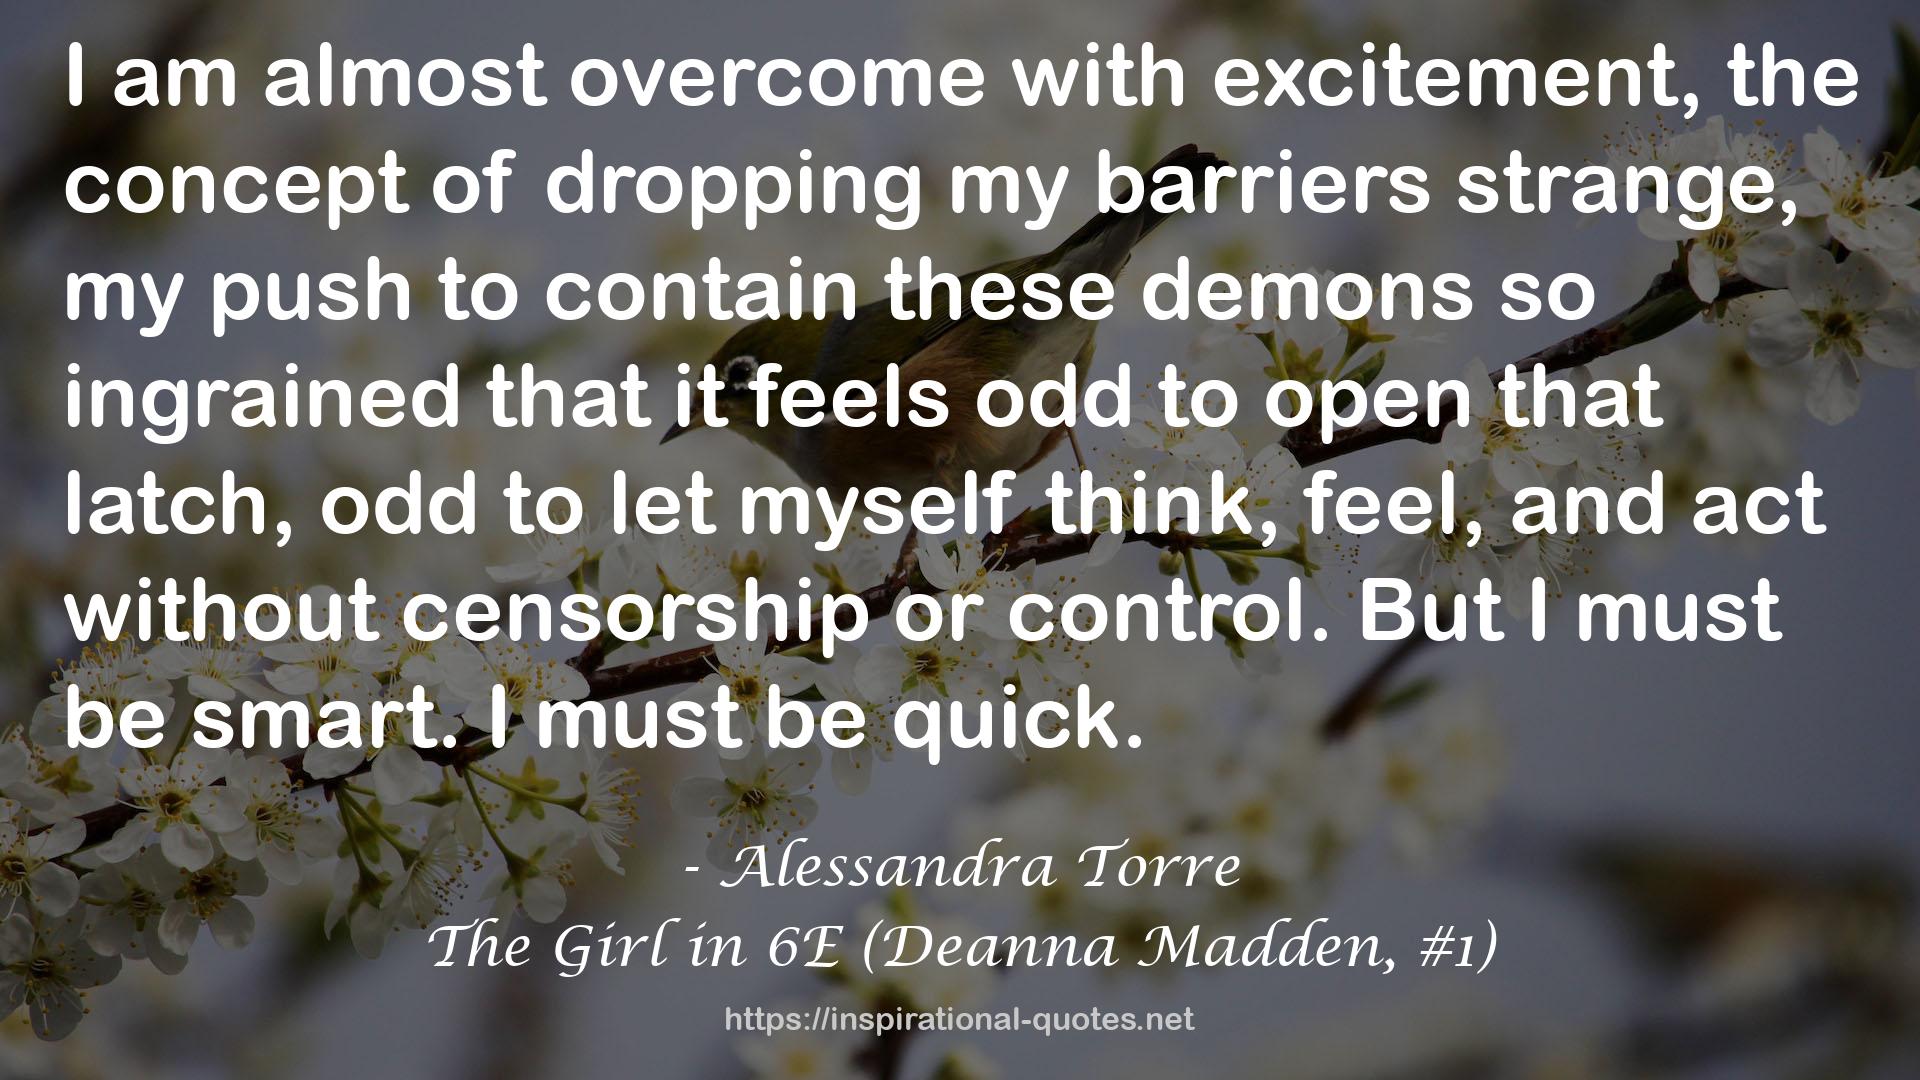 The Girl in 6E (Deanna Madden, #1) QUOTES